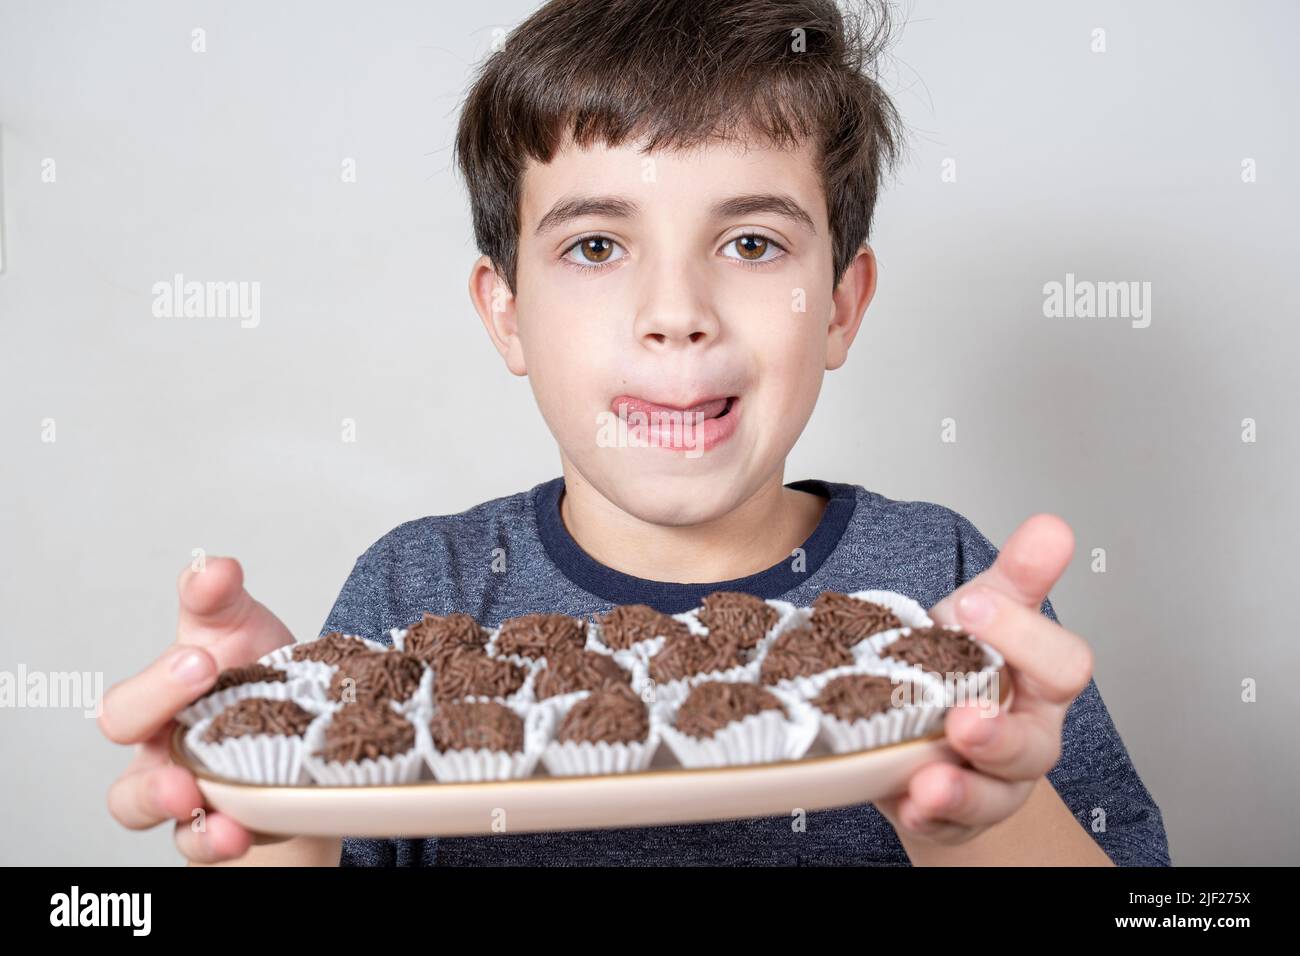 9 year old Brazilian holding a tray with several Brazilian fudge balls and licking his lips. Stock Photo